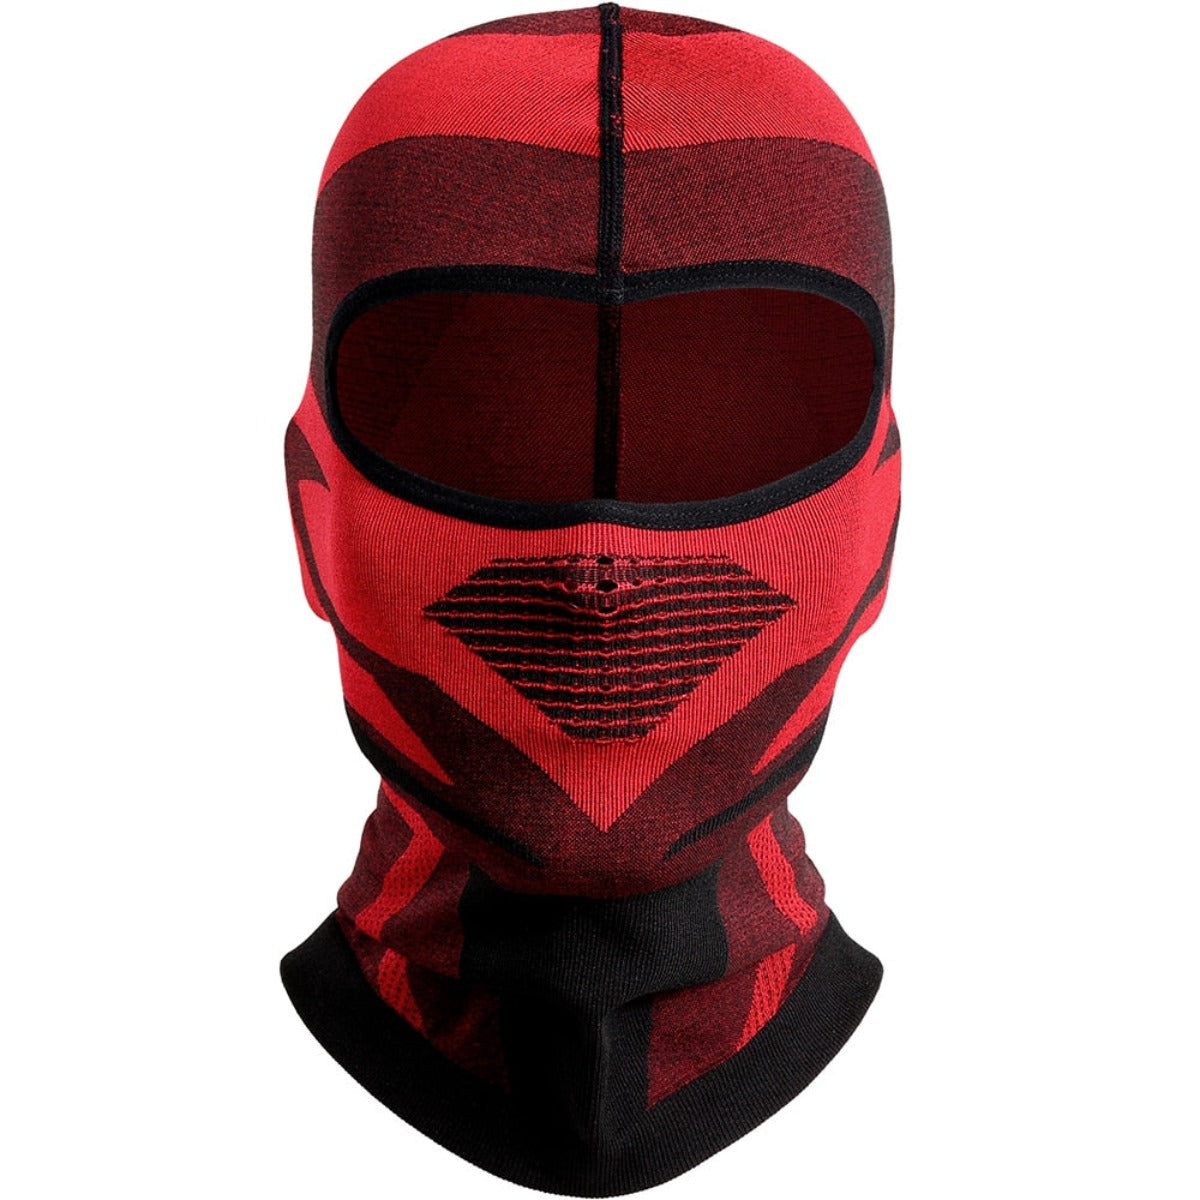 A breathable and windproof Breathable Motorcycle Full Face Cover in red and black.